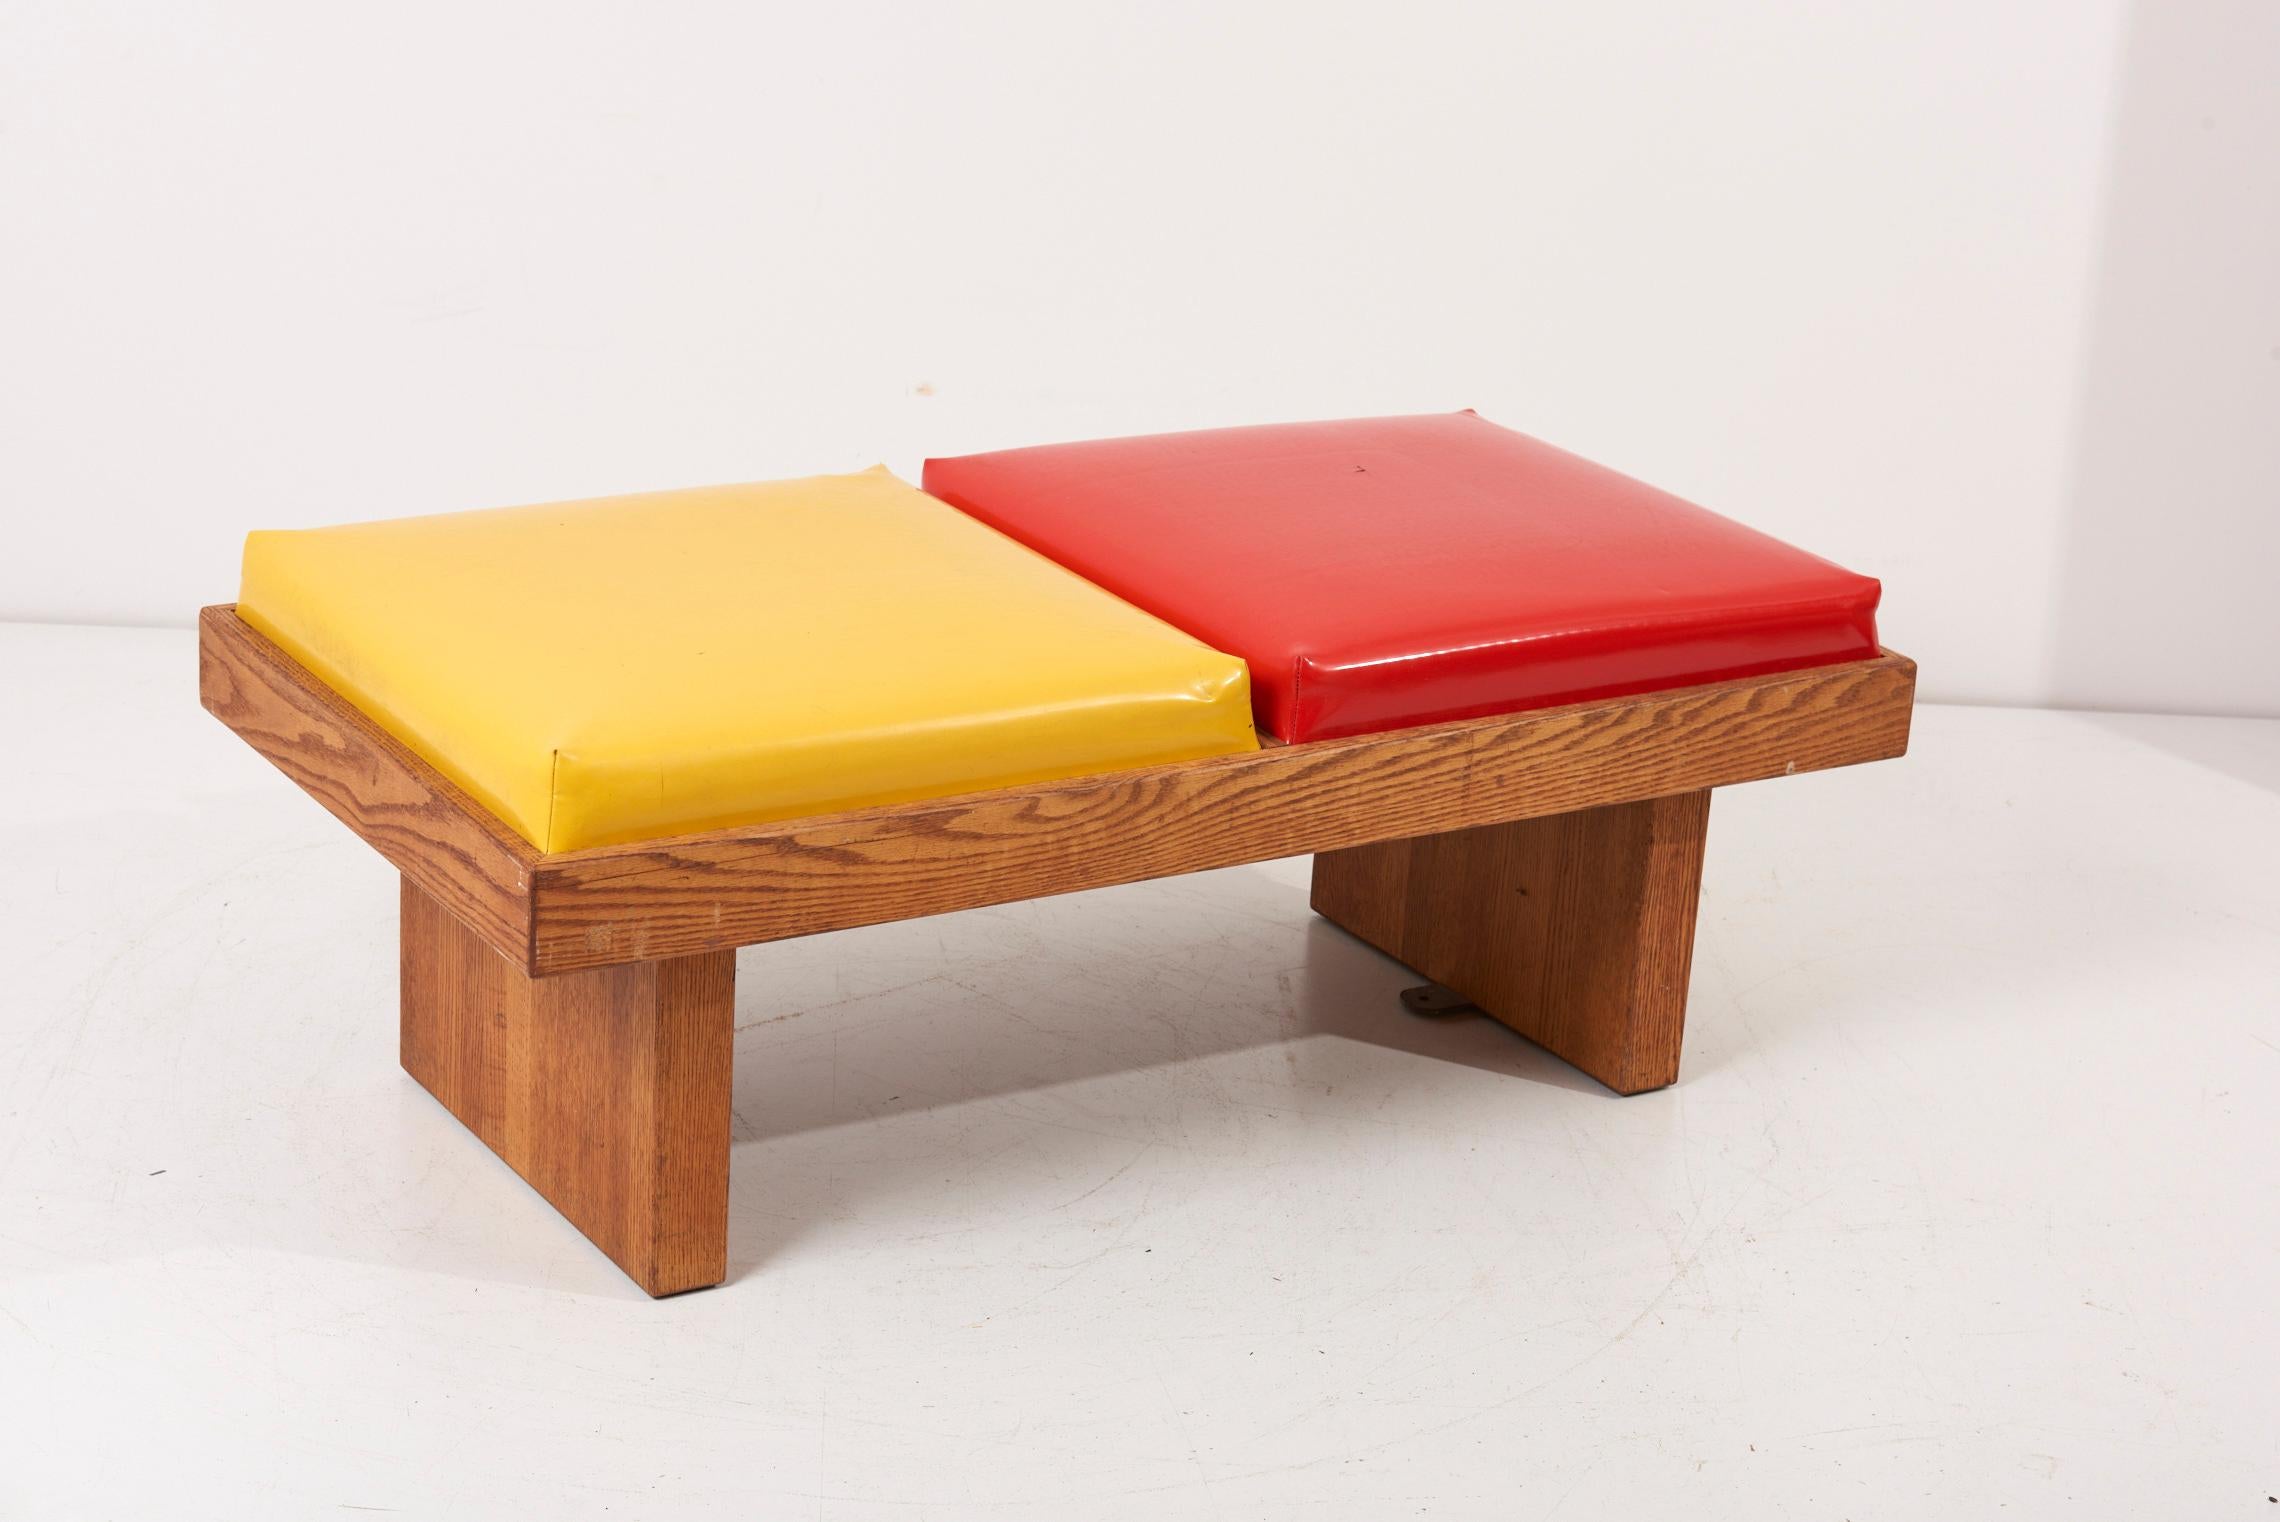 Bench by Harvey Probber in Ketchup / Mustard in Oak, USA 1960s In Good Condition For Sale In Berlin, DE